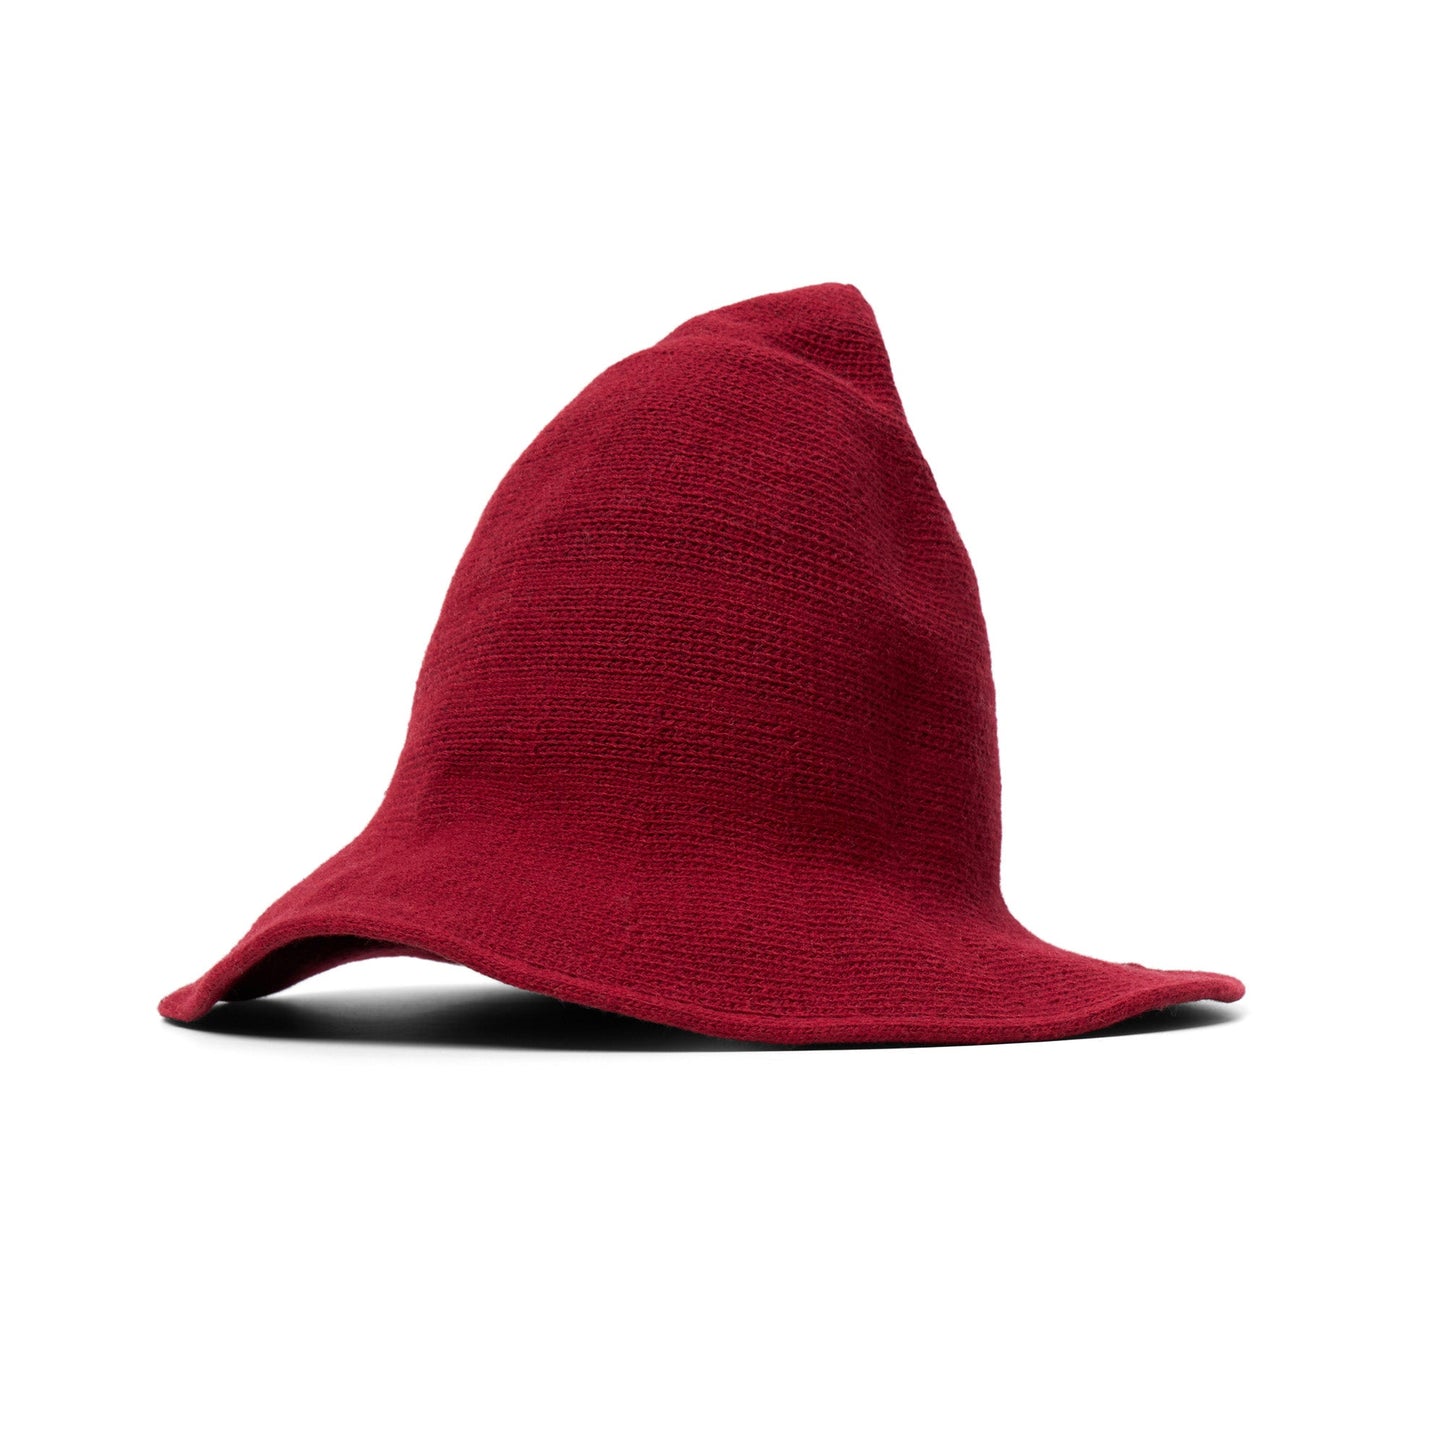 Wizard Hat - Red